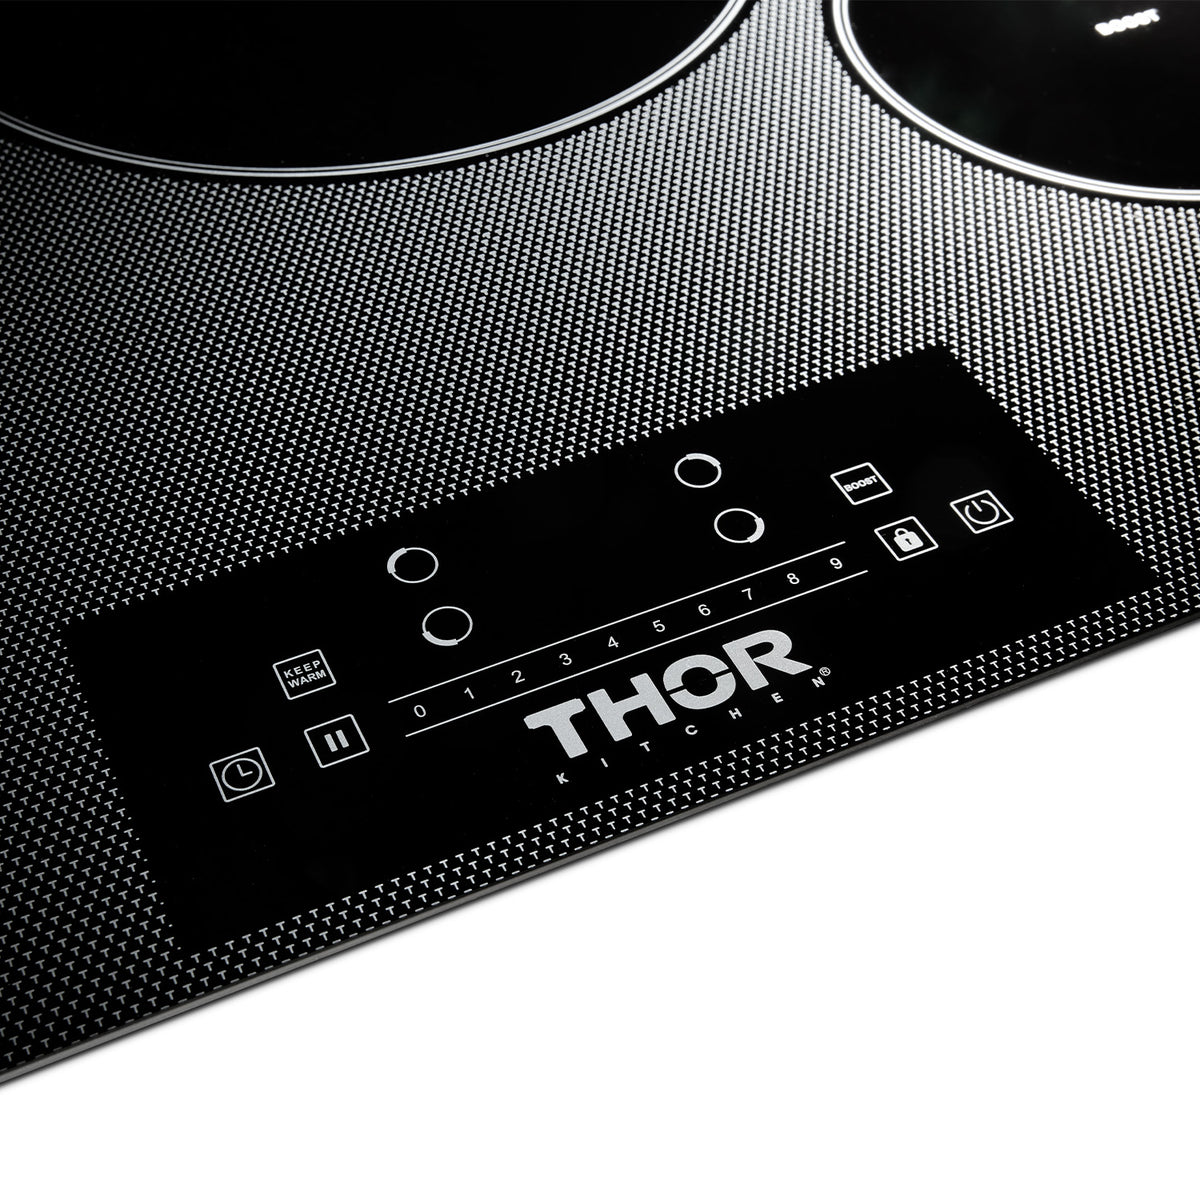 Thor Kitchen 30&quot; Induction Cooktop